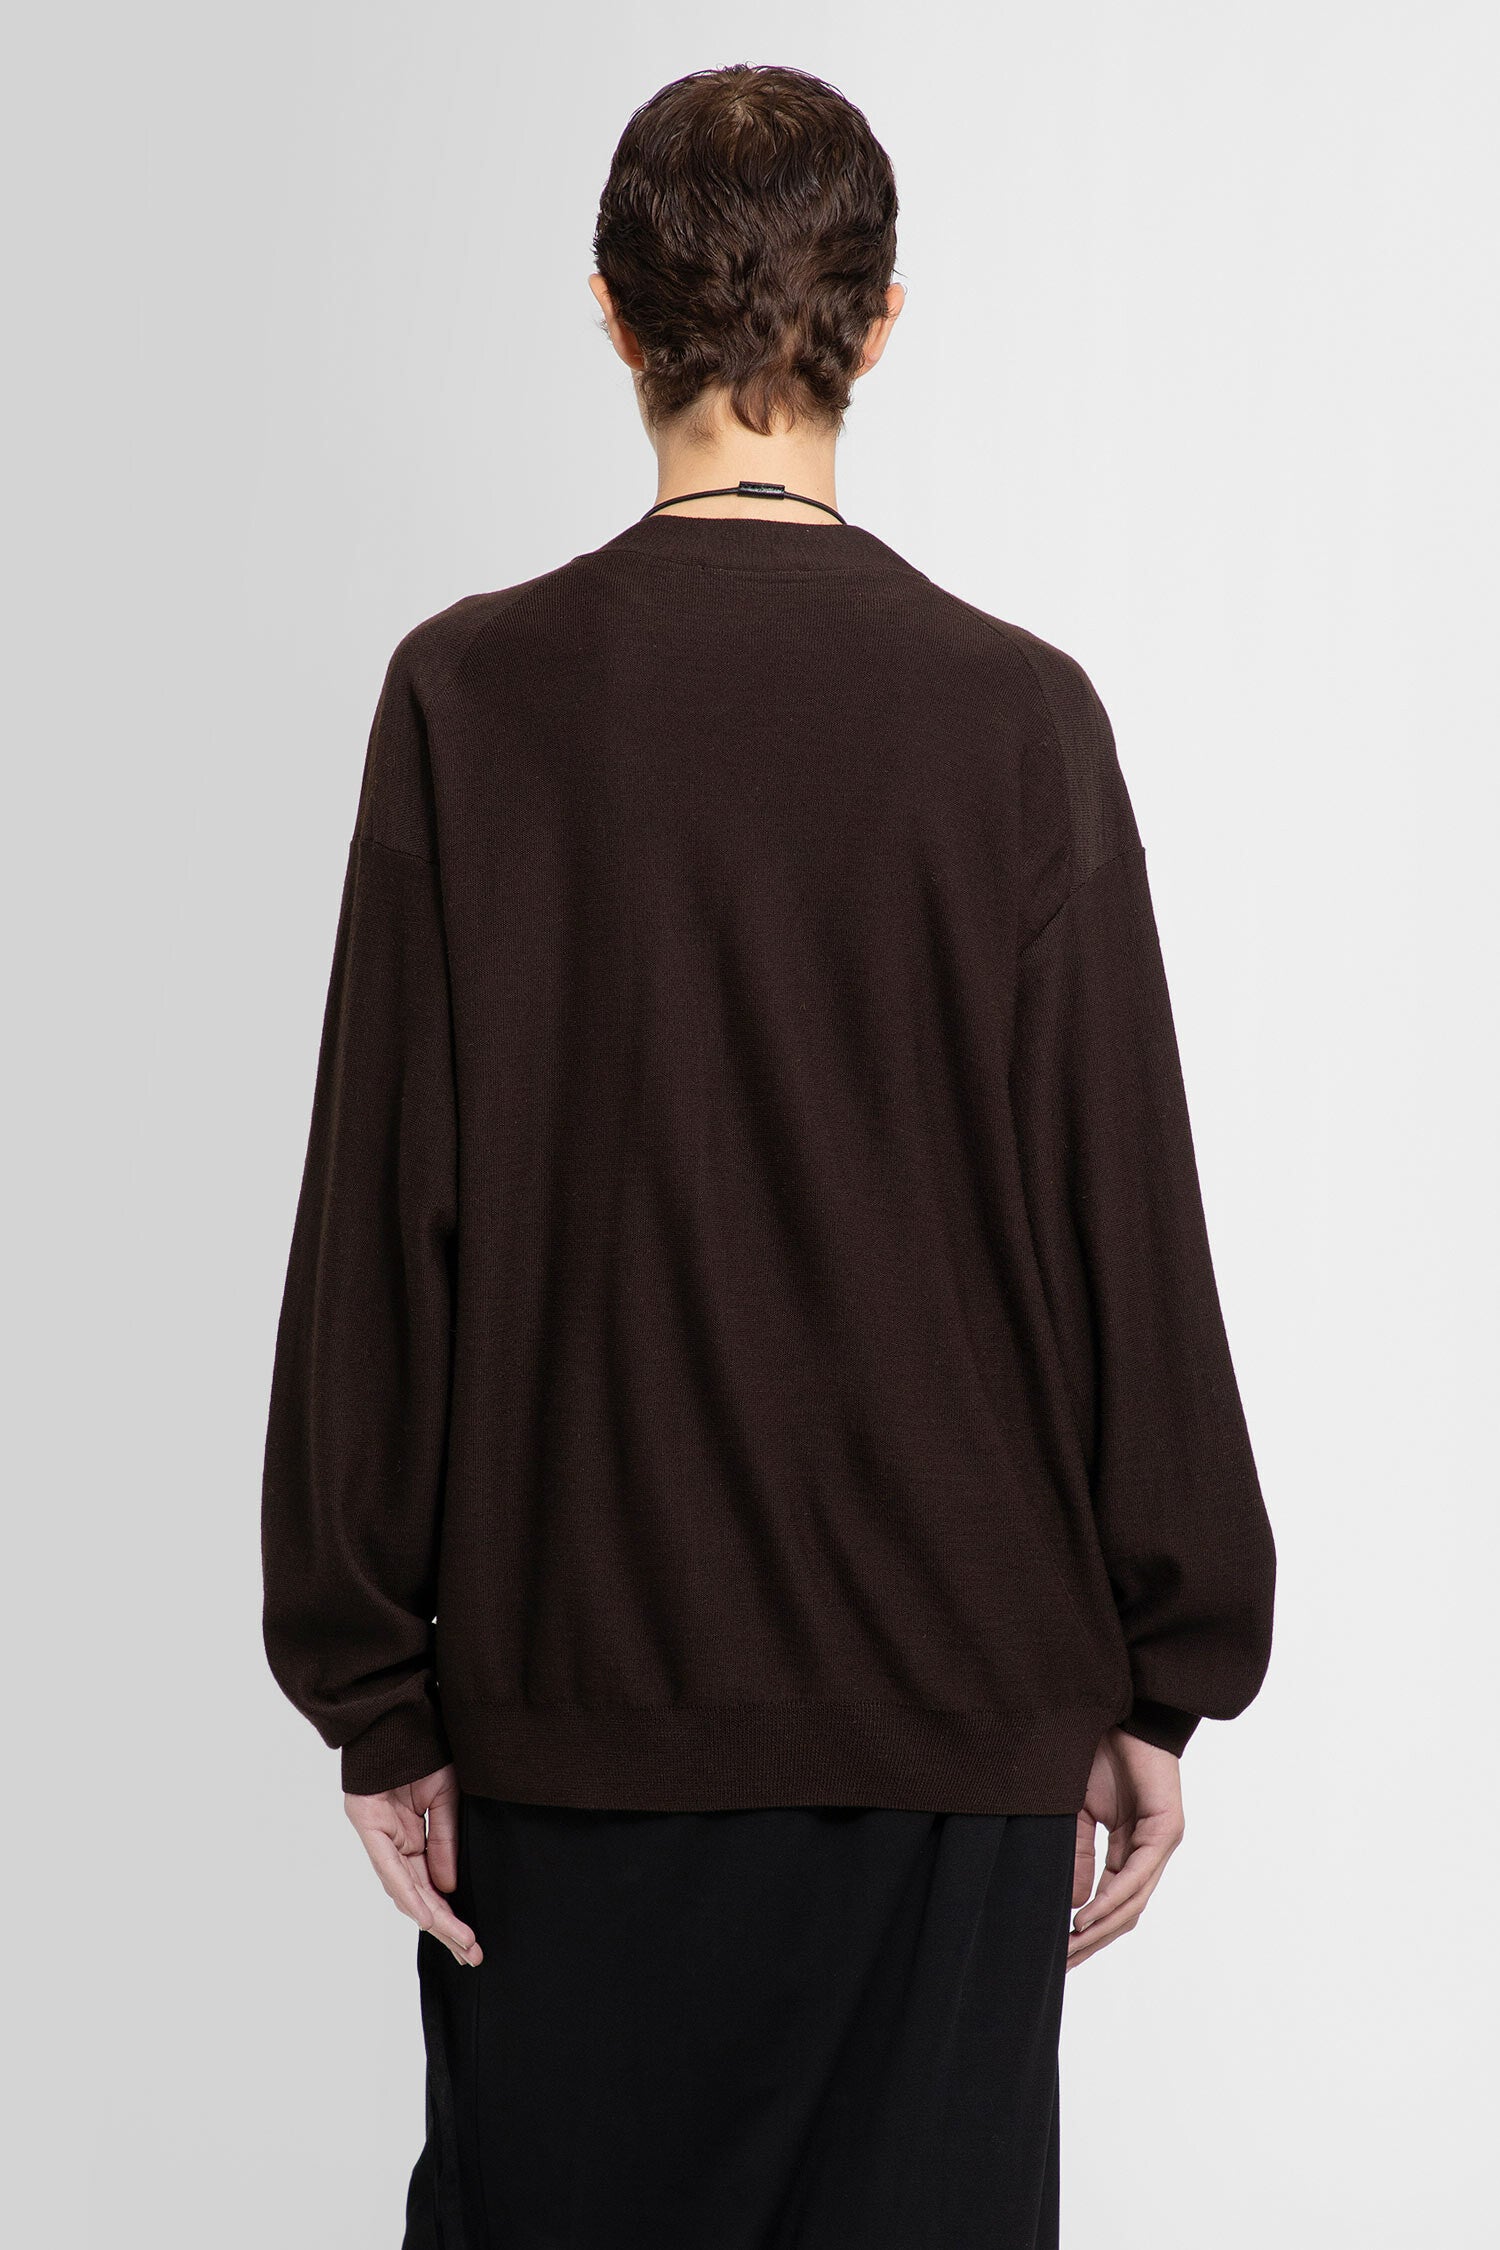 LEMAIRE WOMAN BROWN KNITWEAR